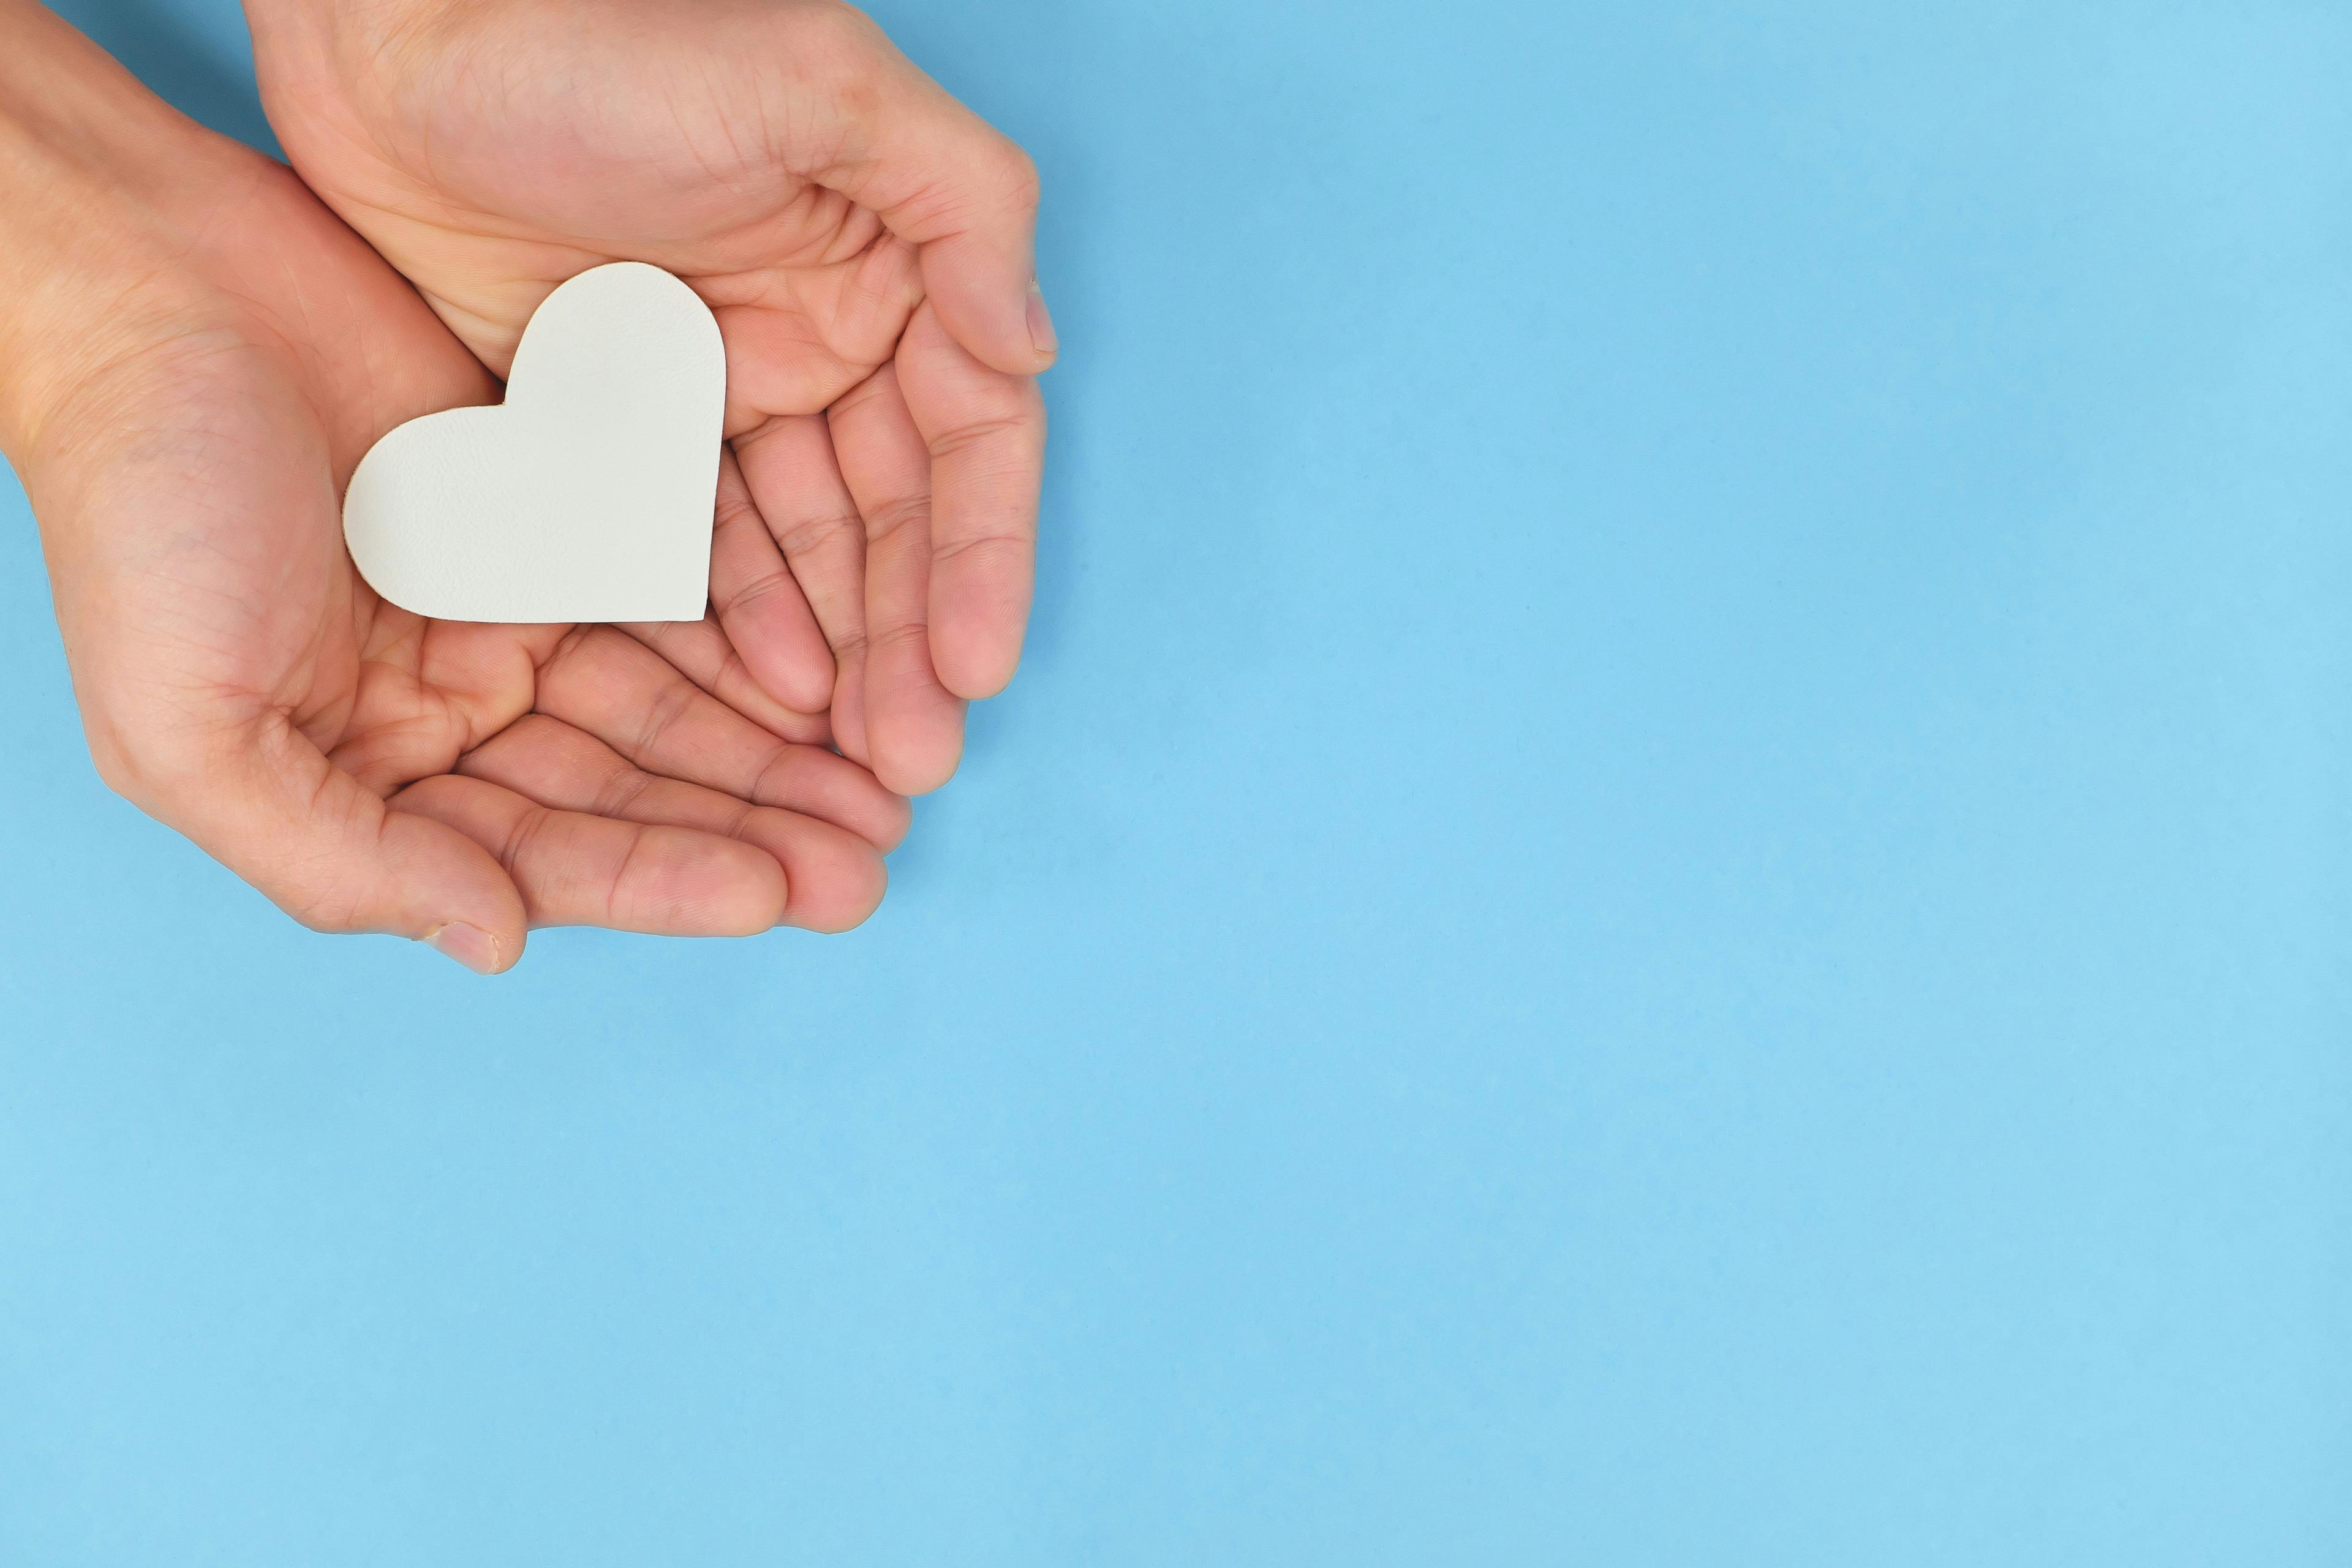 Image of a light blue background with a pair of hands cupping a paper heart.